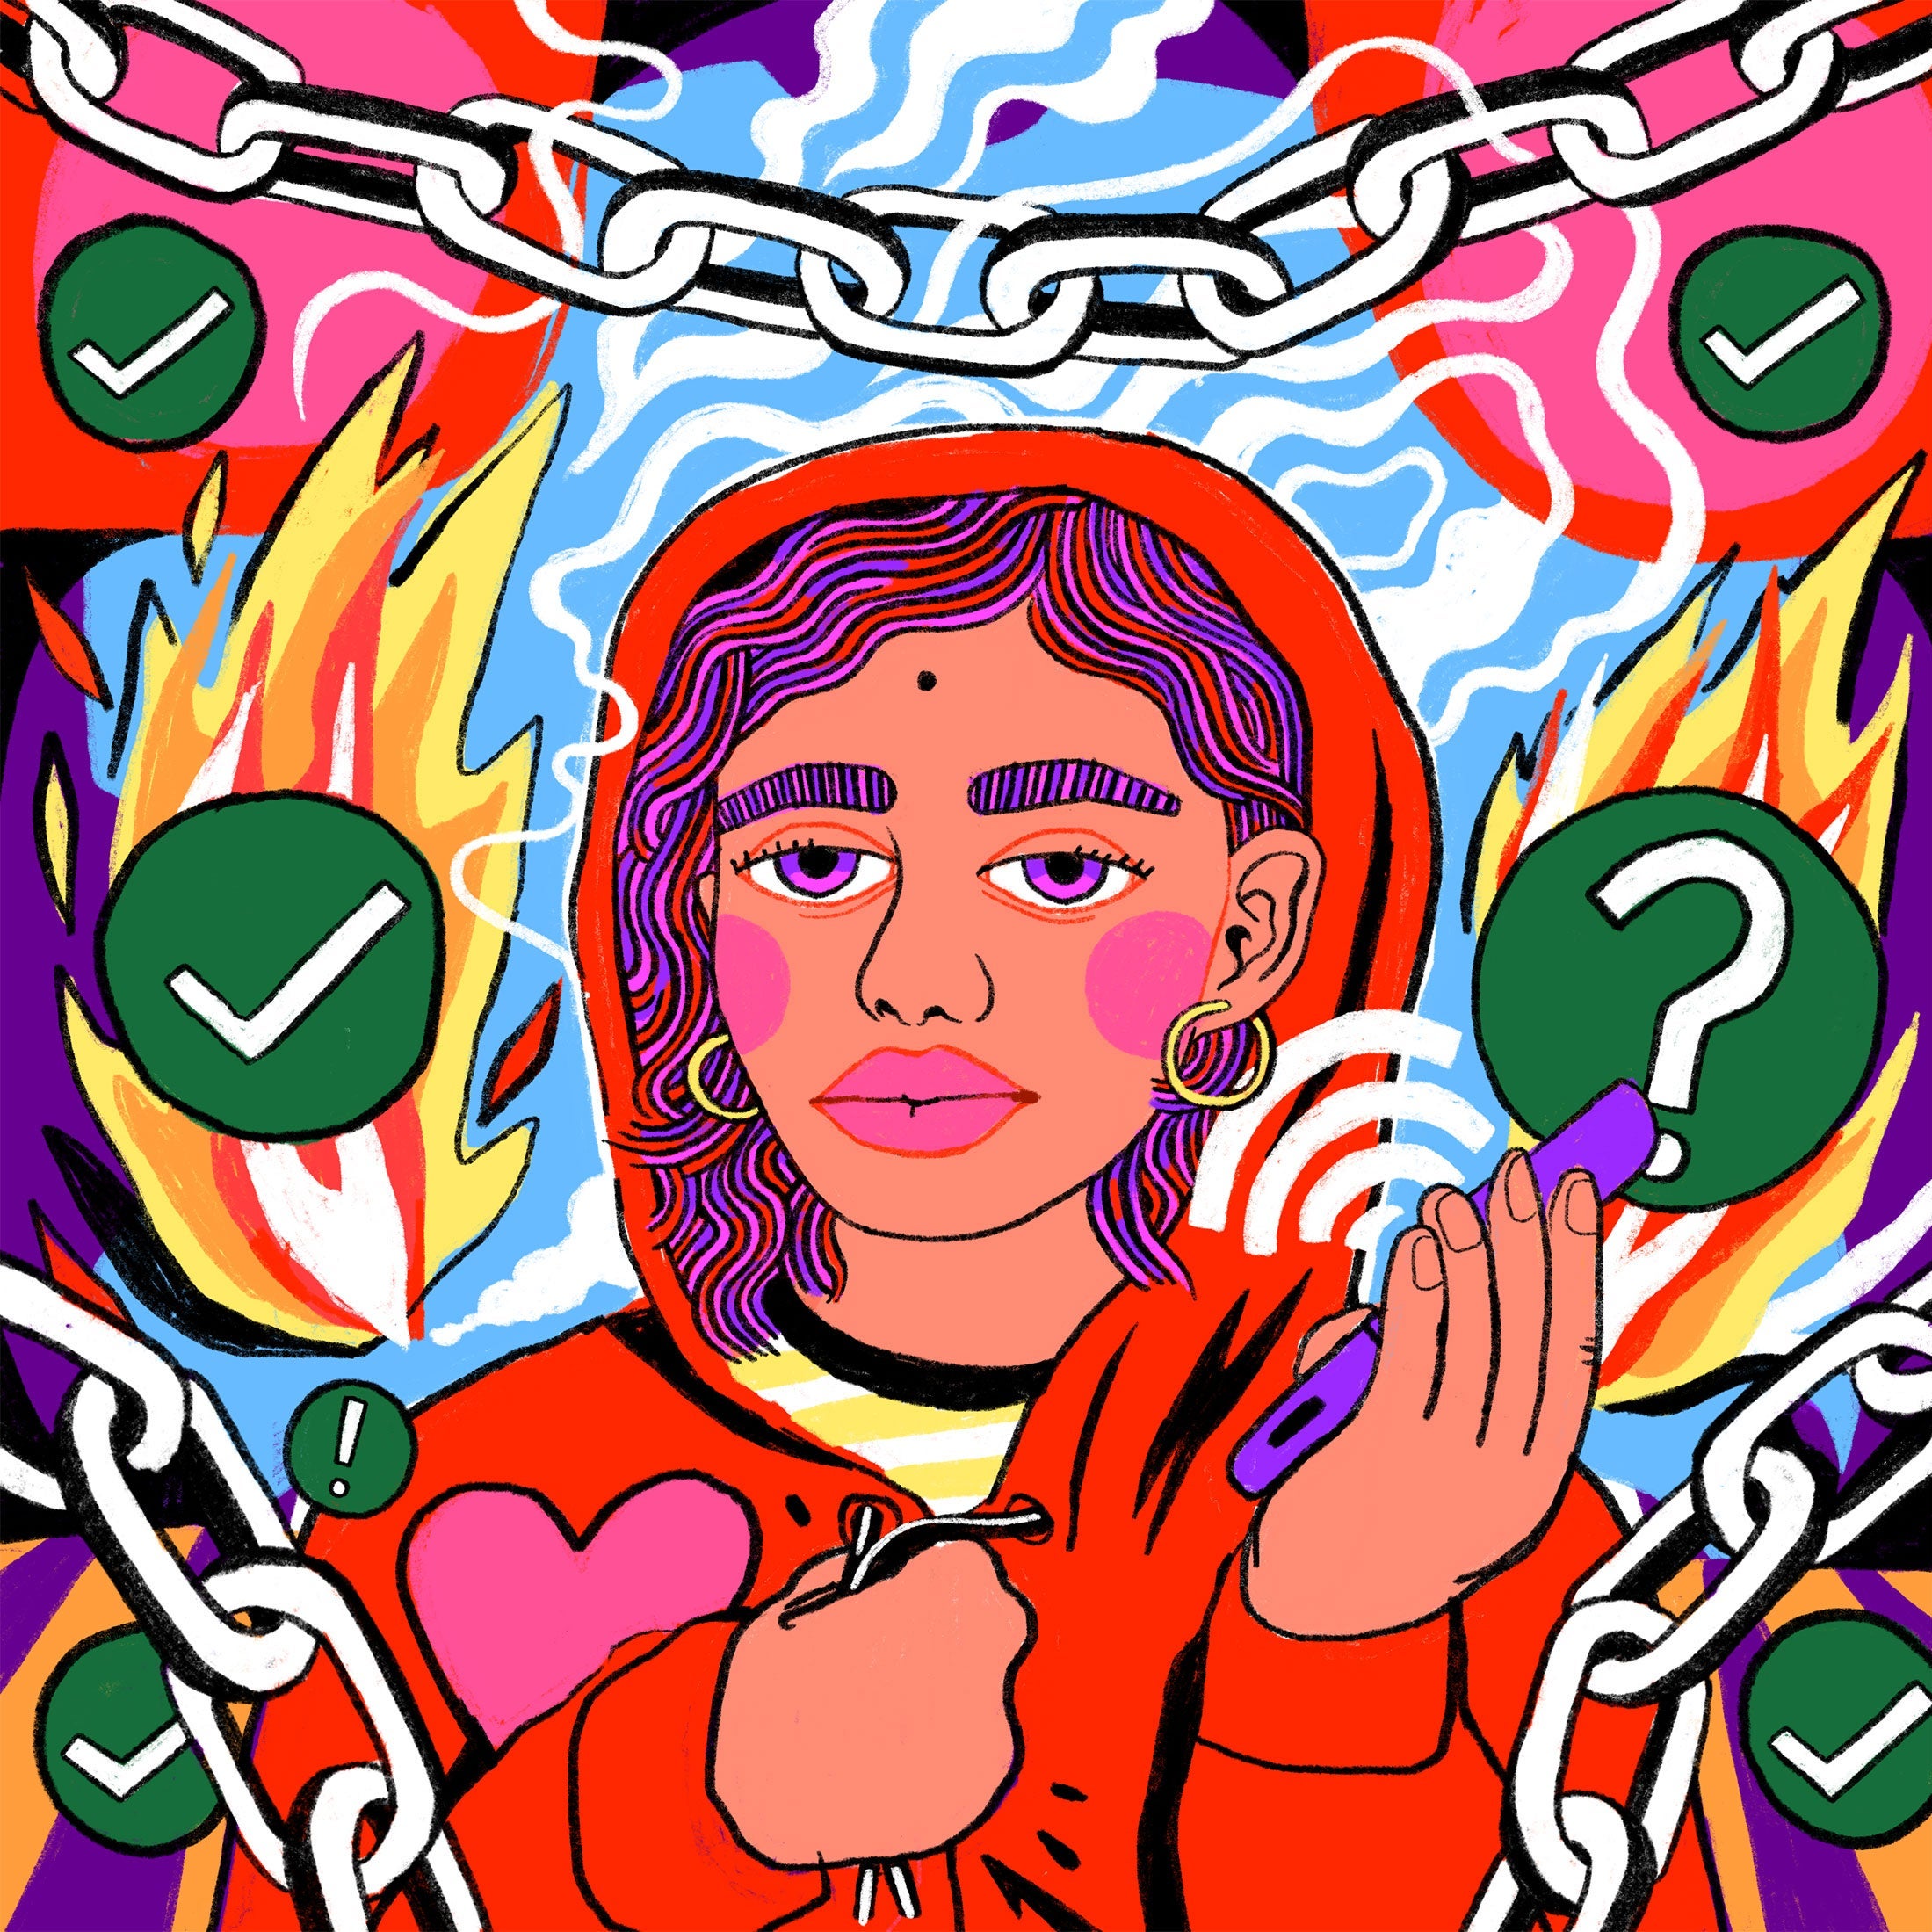 Illustration of a woman holding a digital device, surrounded by chains, and making opinions.